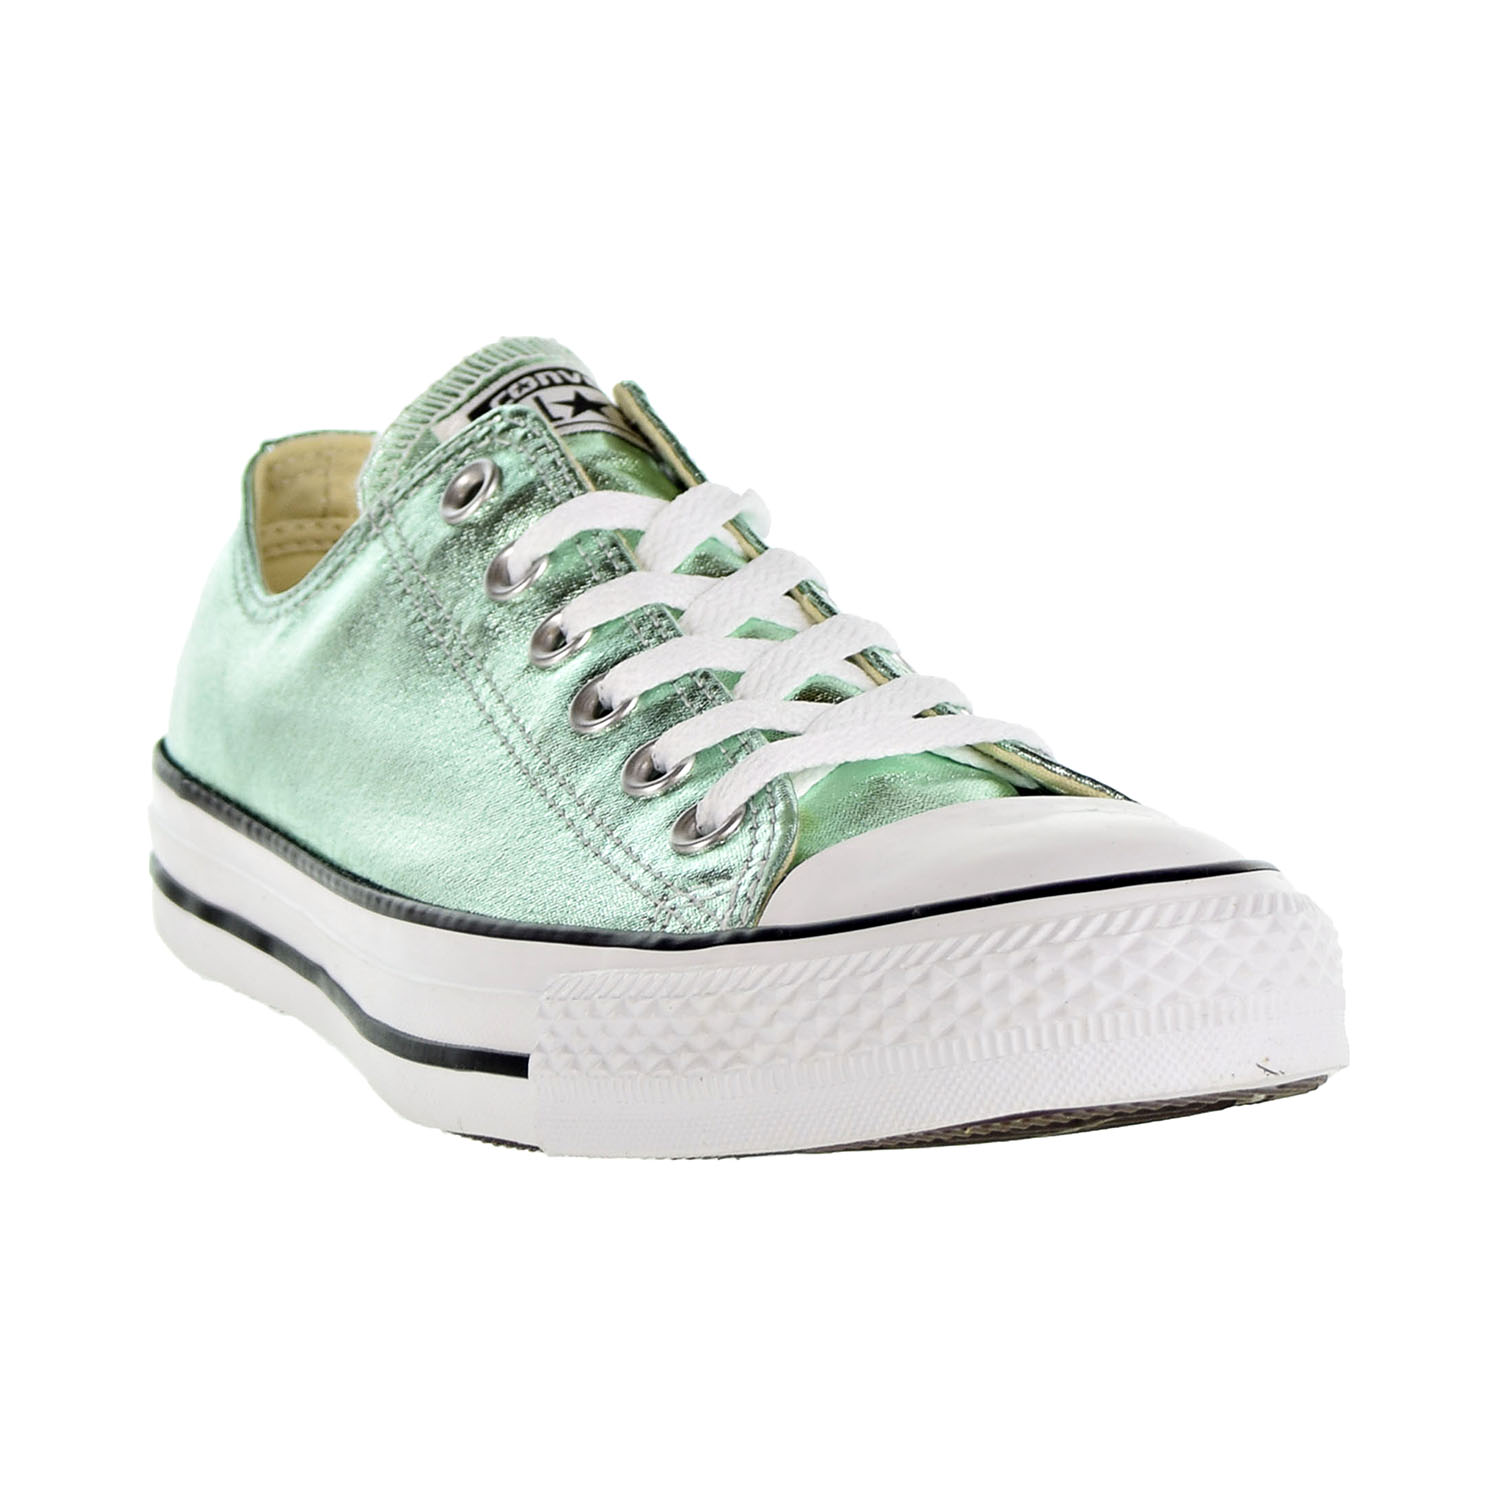 Converse Chuck Taylor All Star Ox Men's Shoes Jade-Black-White 155562f - image 2 of 6